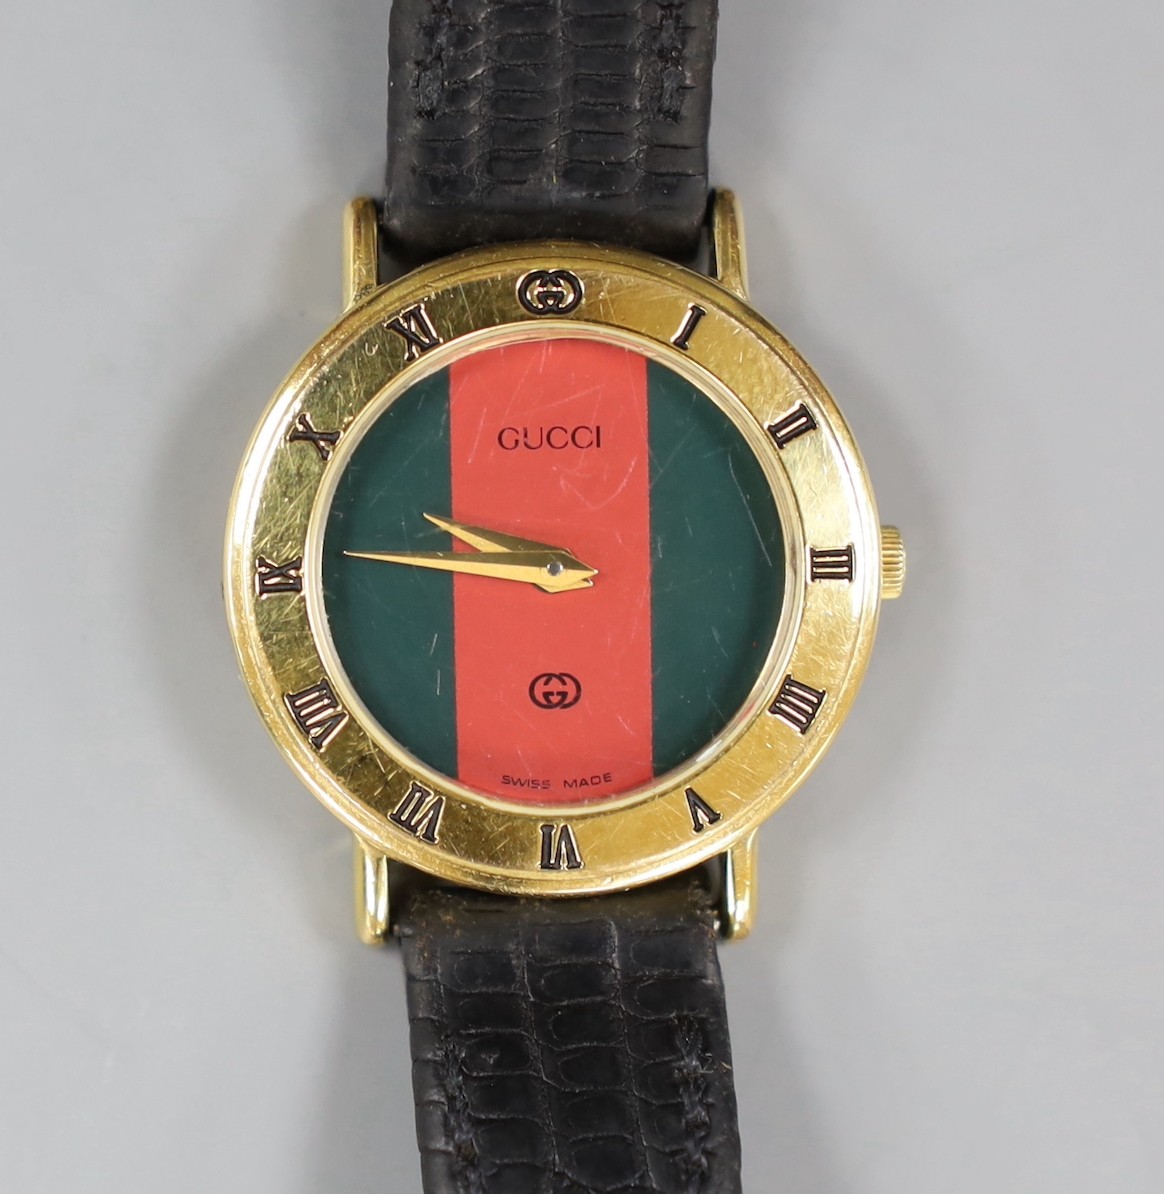 A lady's moder gold plated Gucci quartz wrist watch, no box or papers.